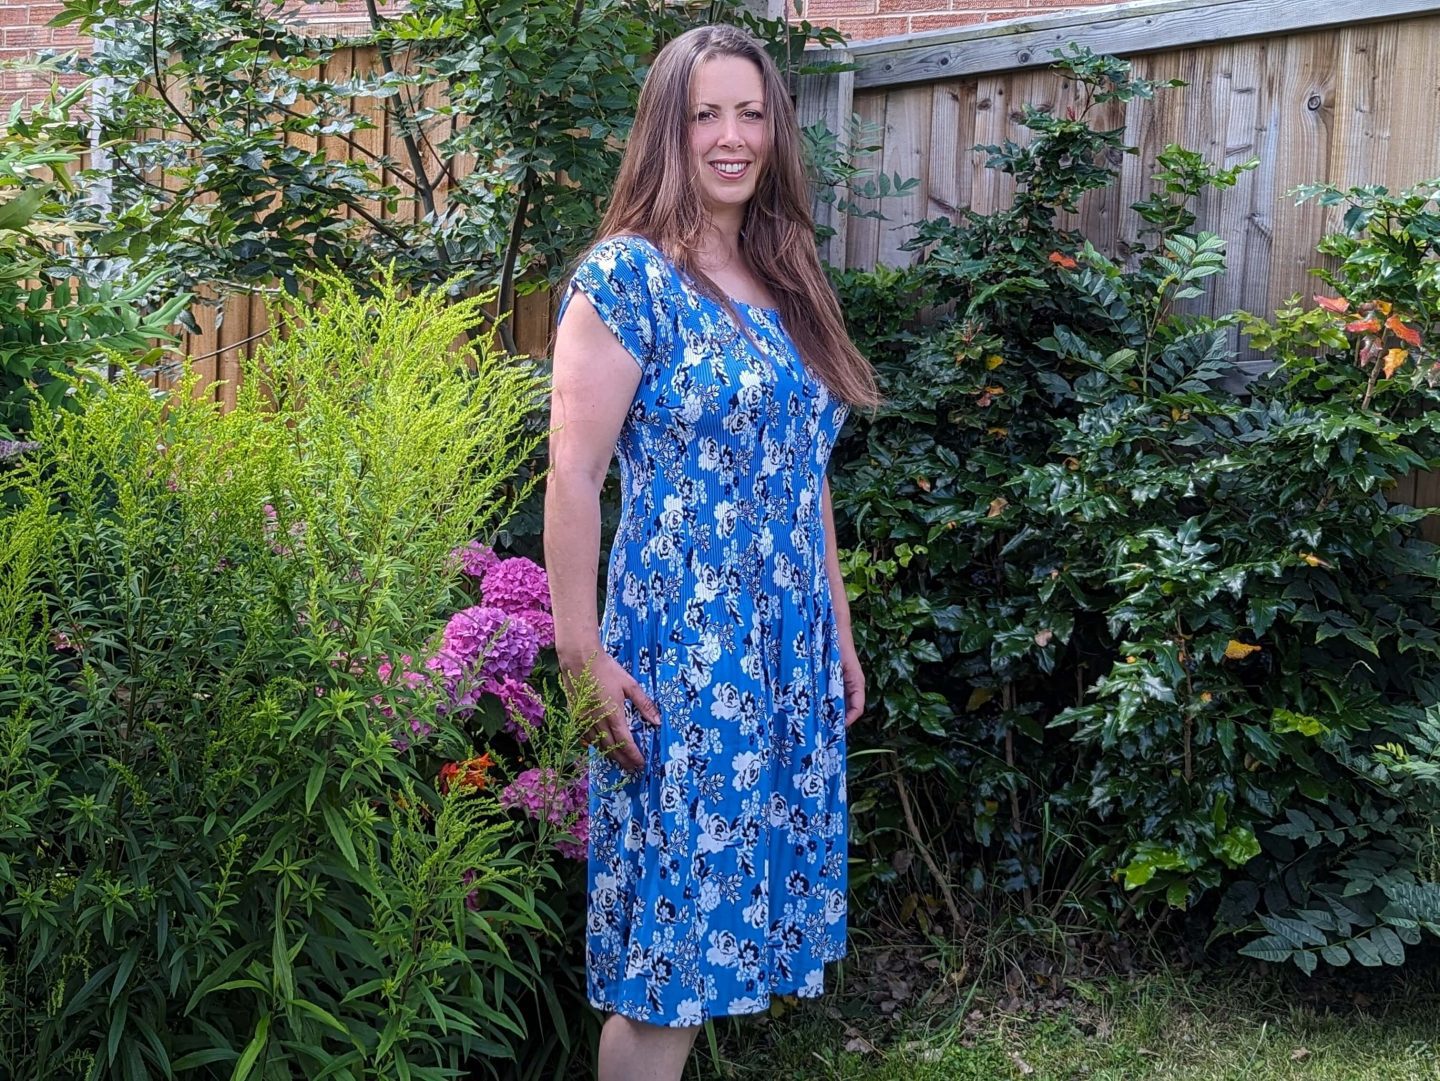 Natalie standing in the garden wearing a blue floral Cotton Traders Jasmine Harman Collection dress